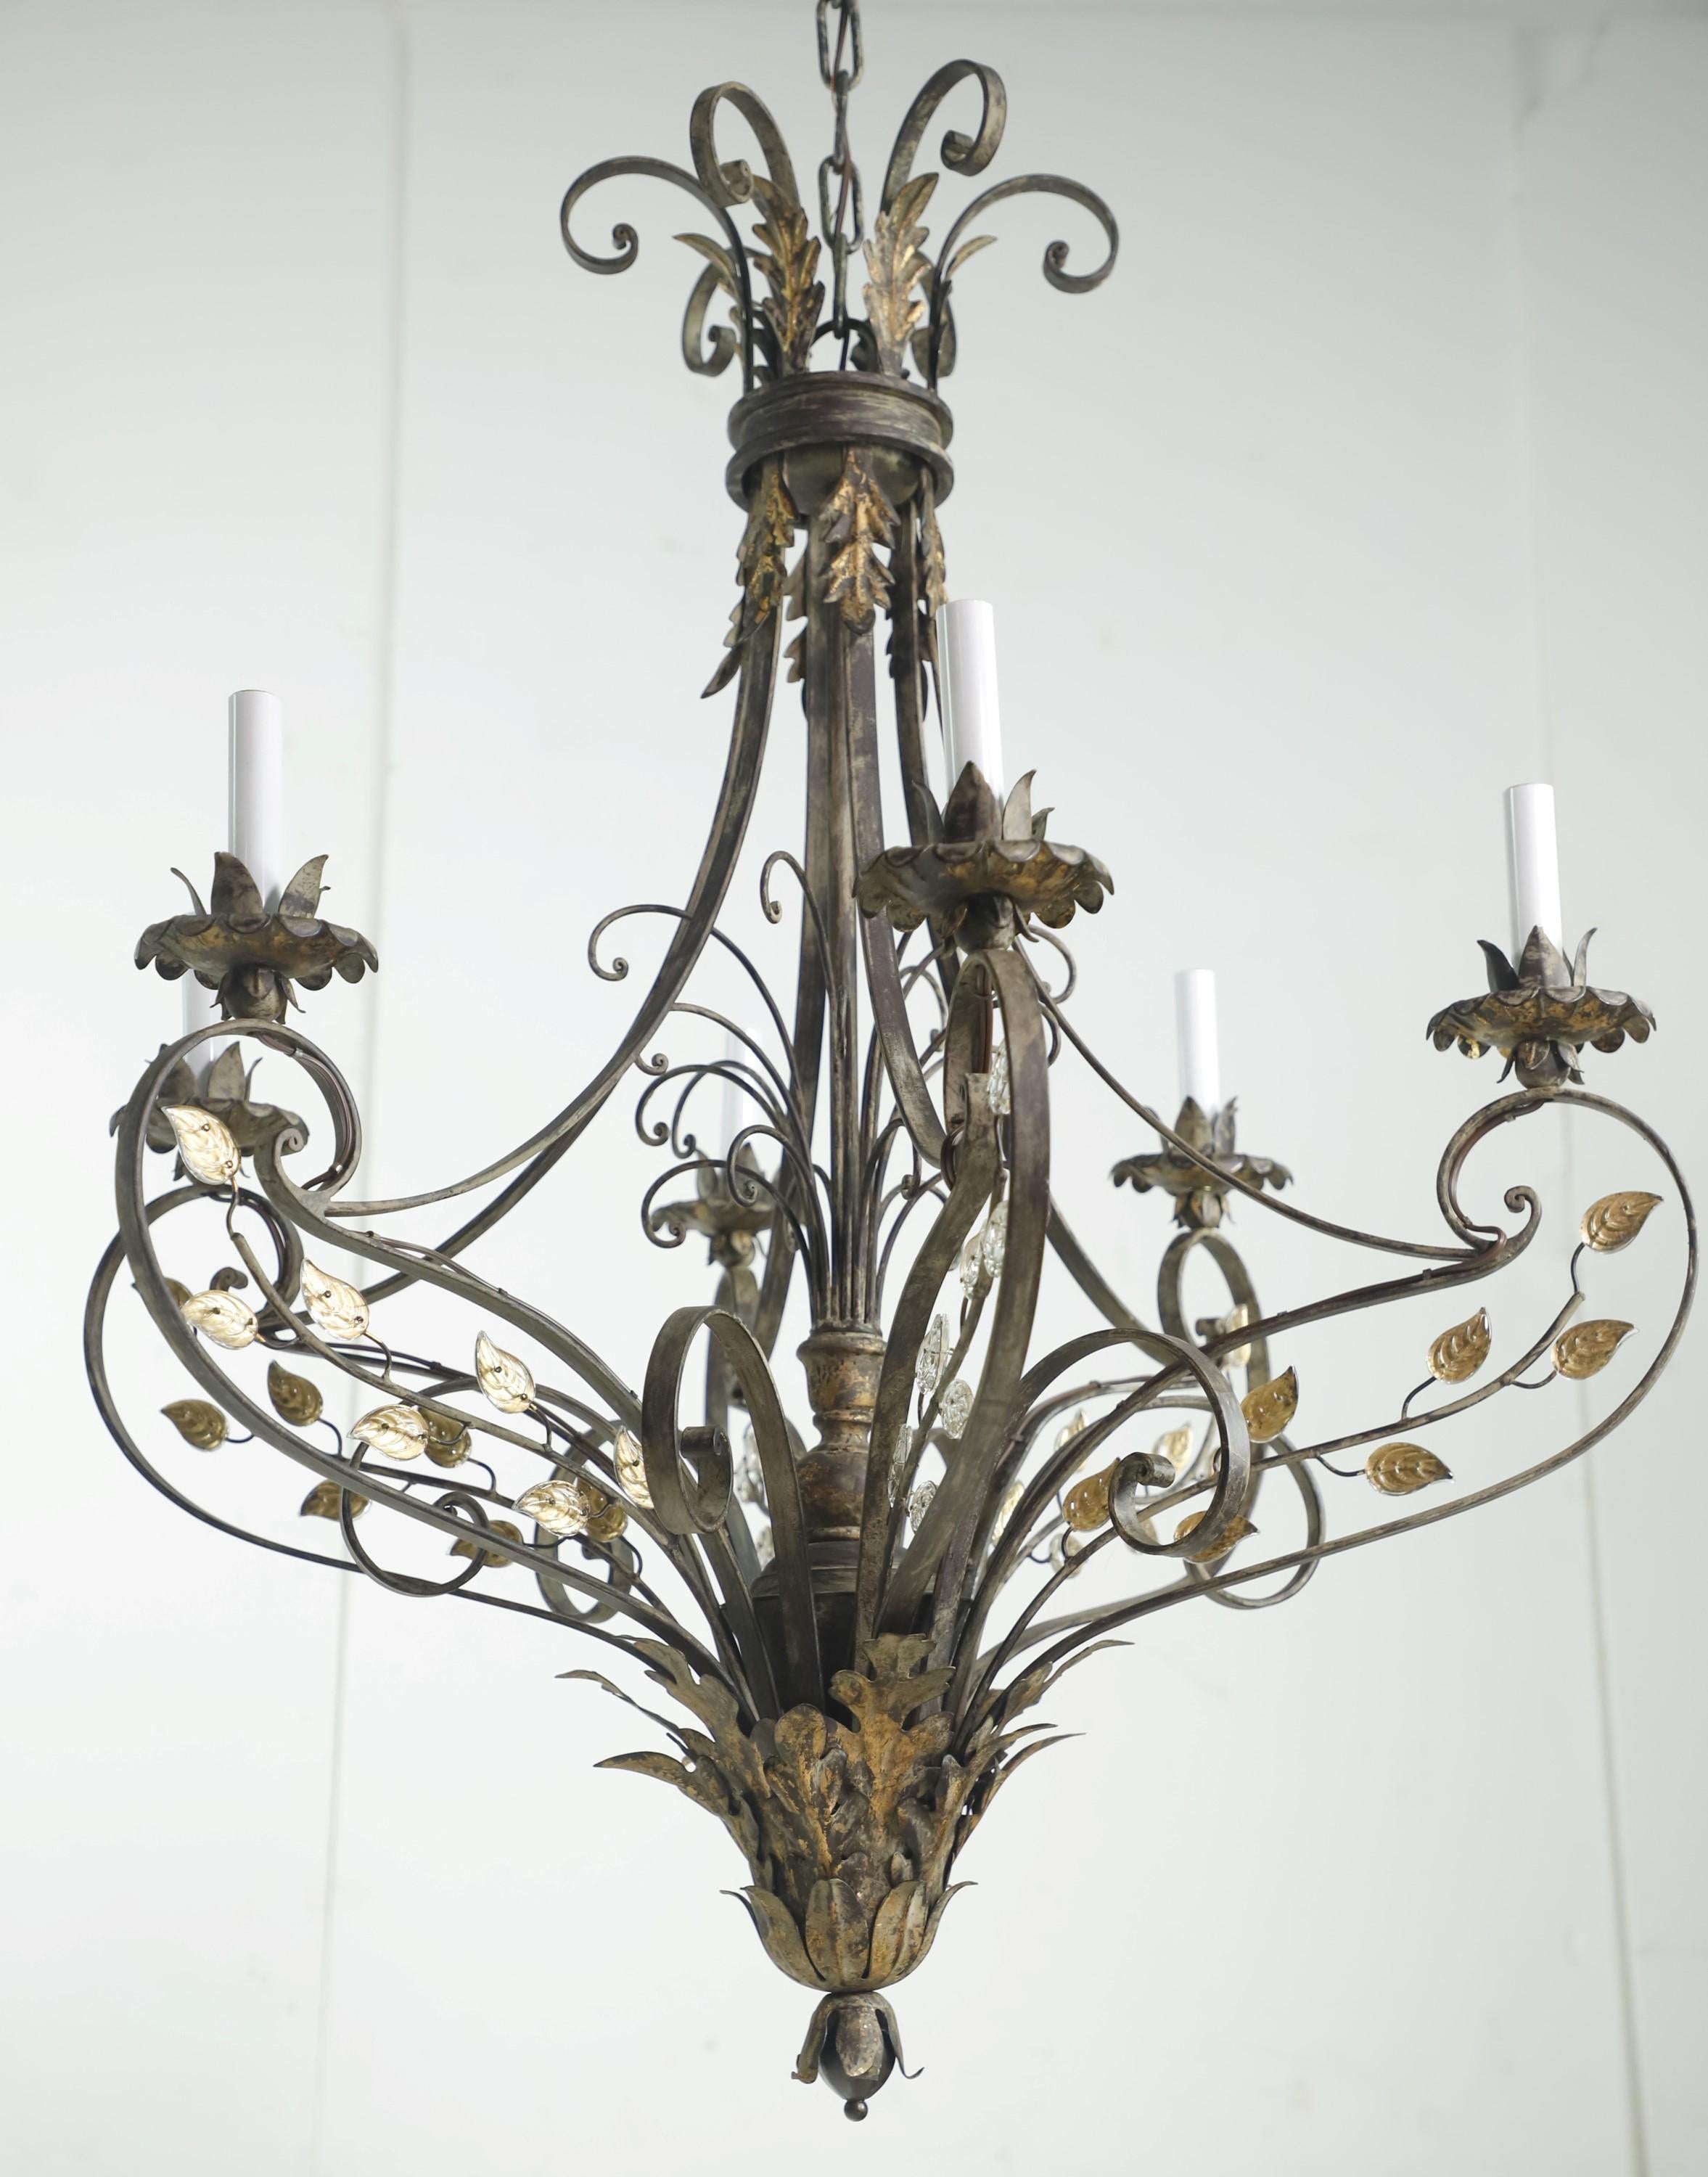 6 Light Gilt Wrought Iron & Crystal Leaves Chandelier In Good Condition For Sale In New York, NY